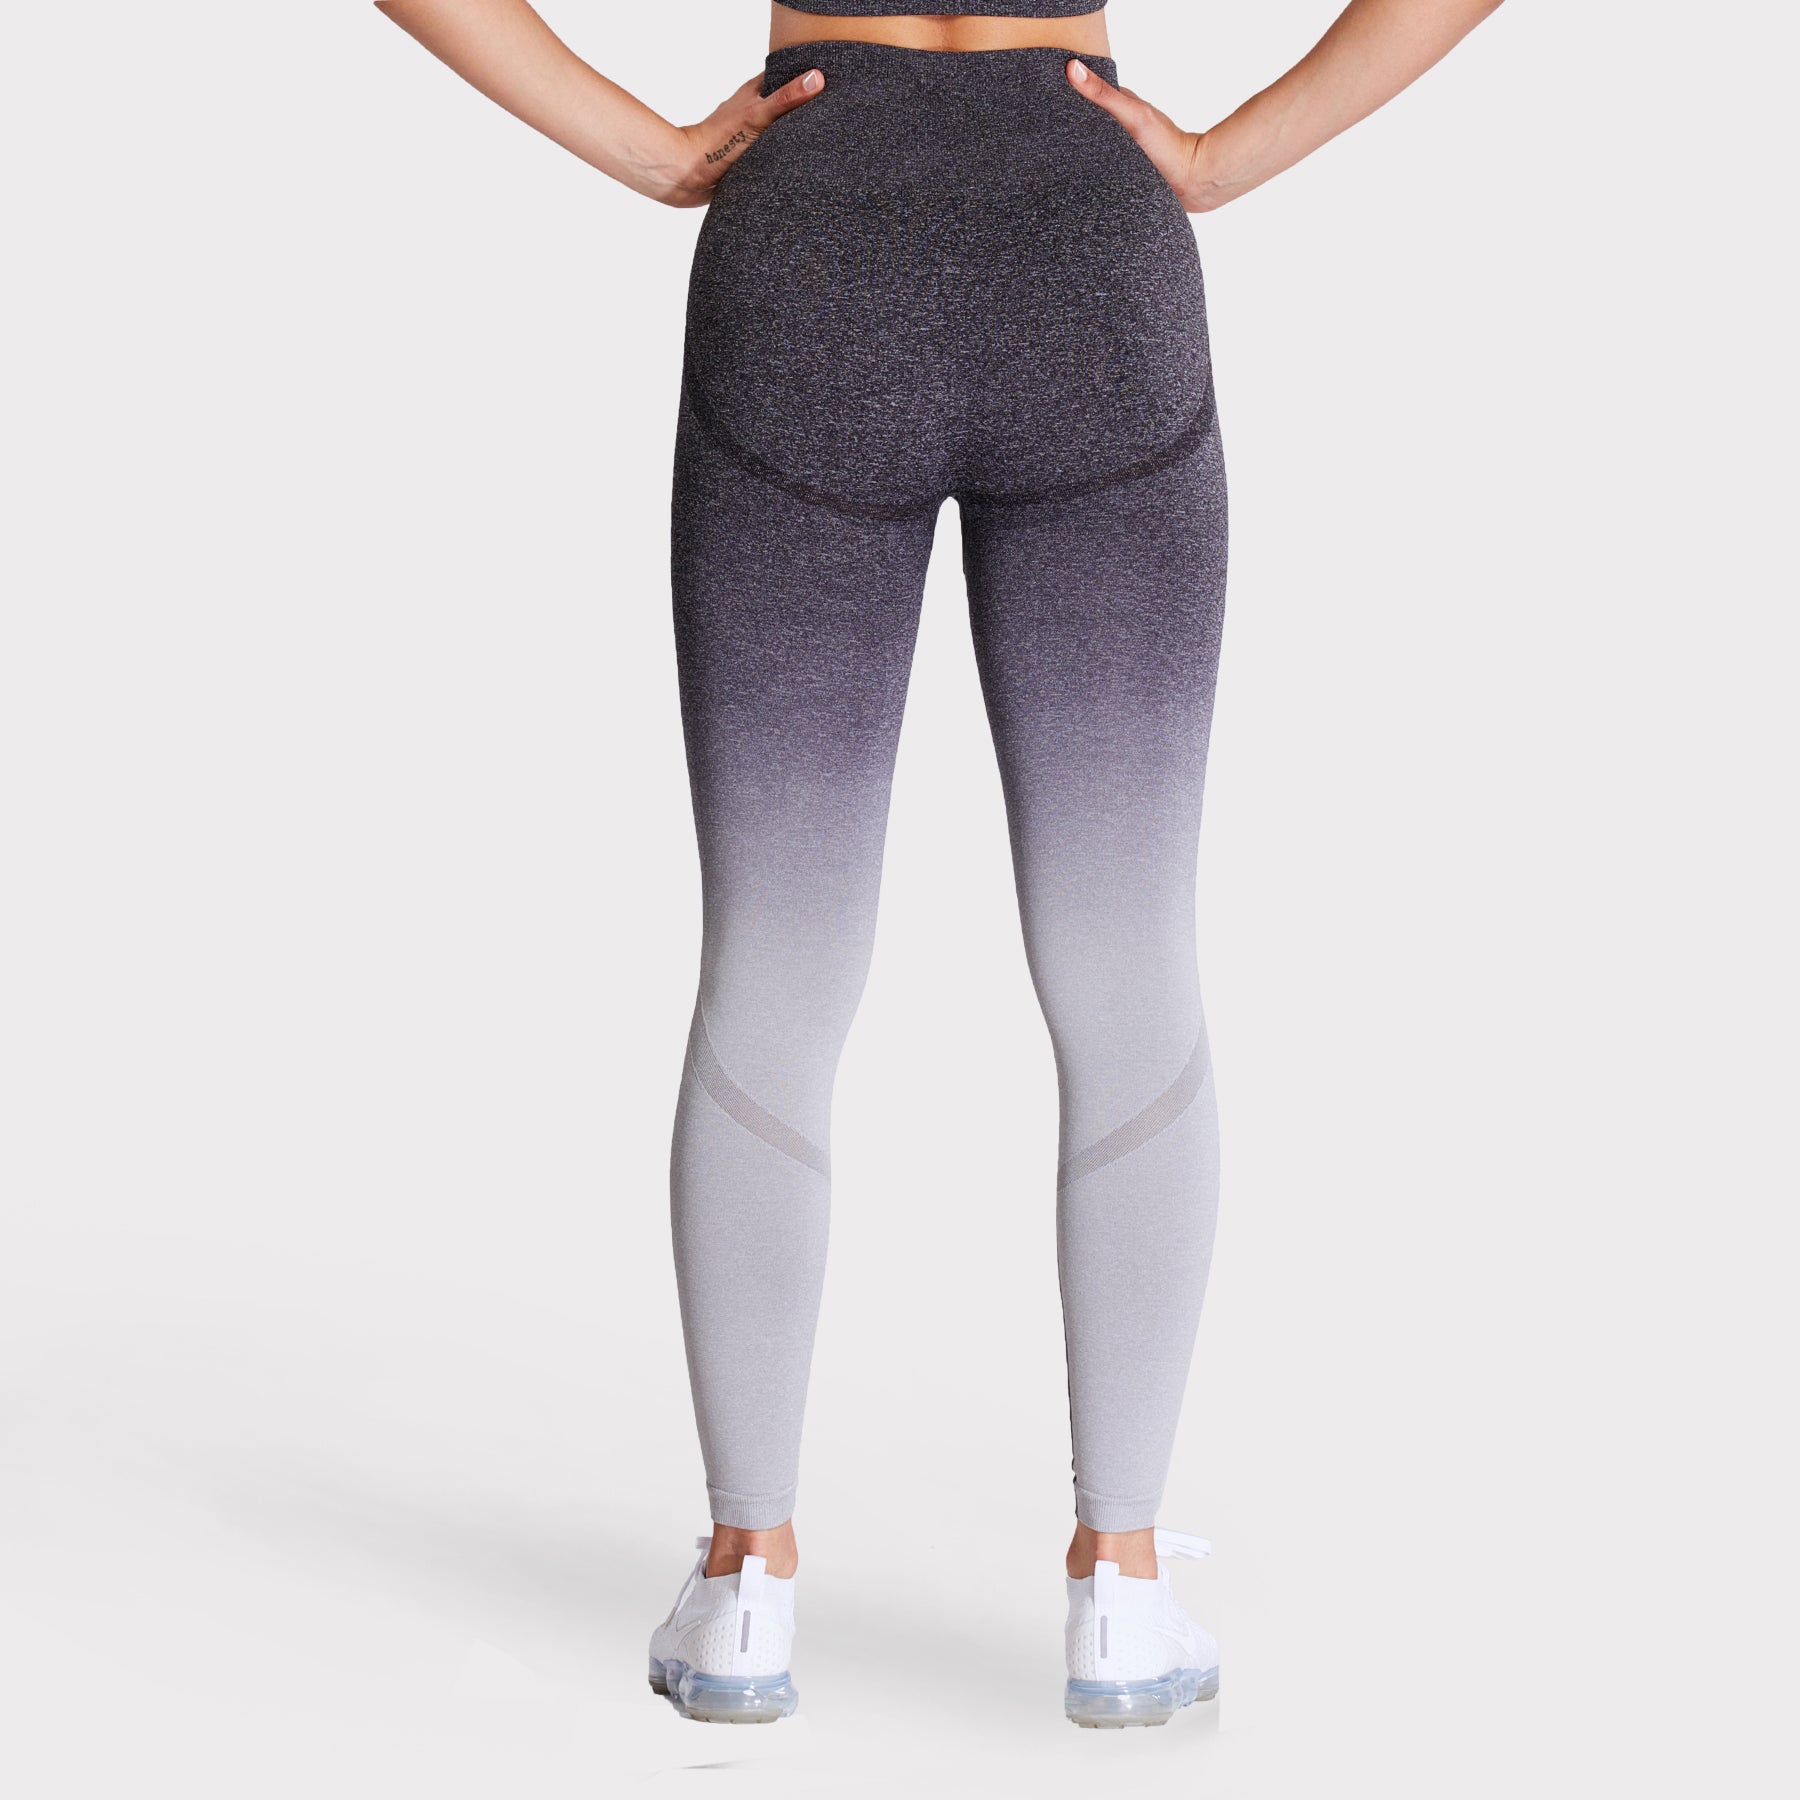 Aoxjox High Waisted Workout Leggings for Women Ghana